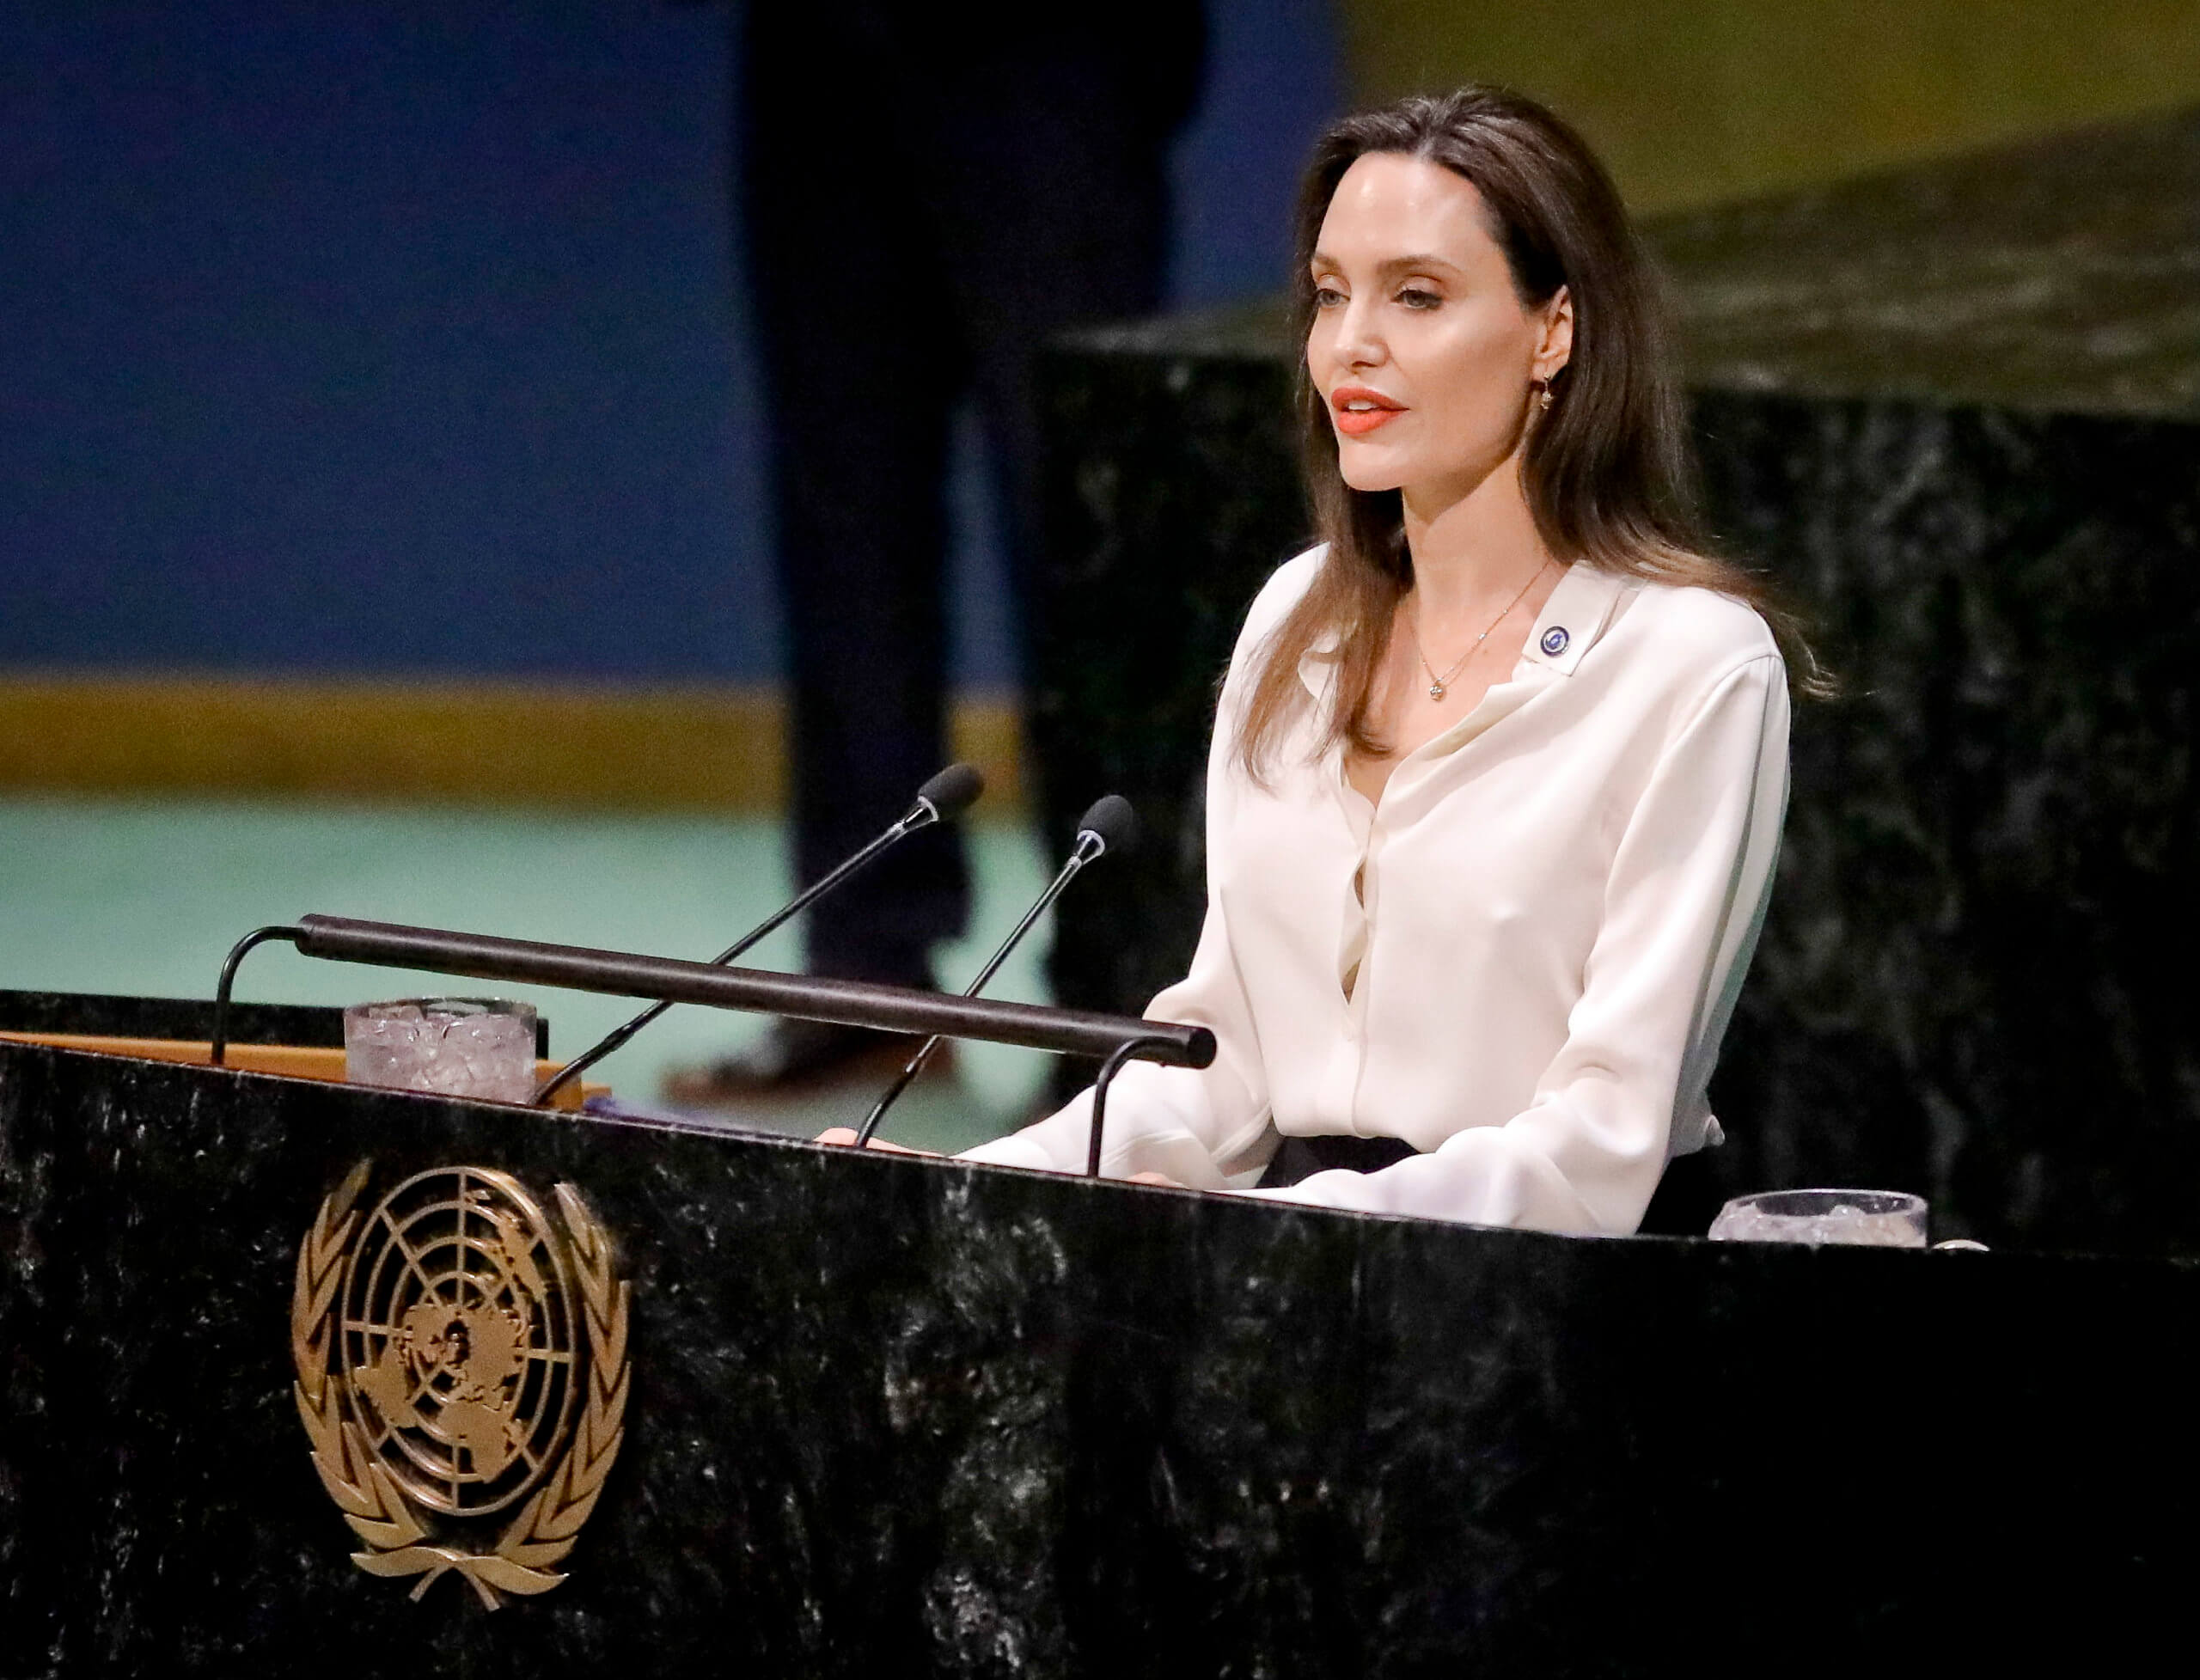 Angelina Jolie, United Nations High Commissioner for Refugees special envoy, address a meeting on U.N. peacekeeping at U.N. headquarters on March 29, 2019.